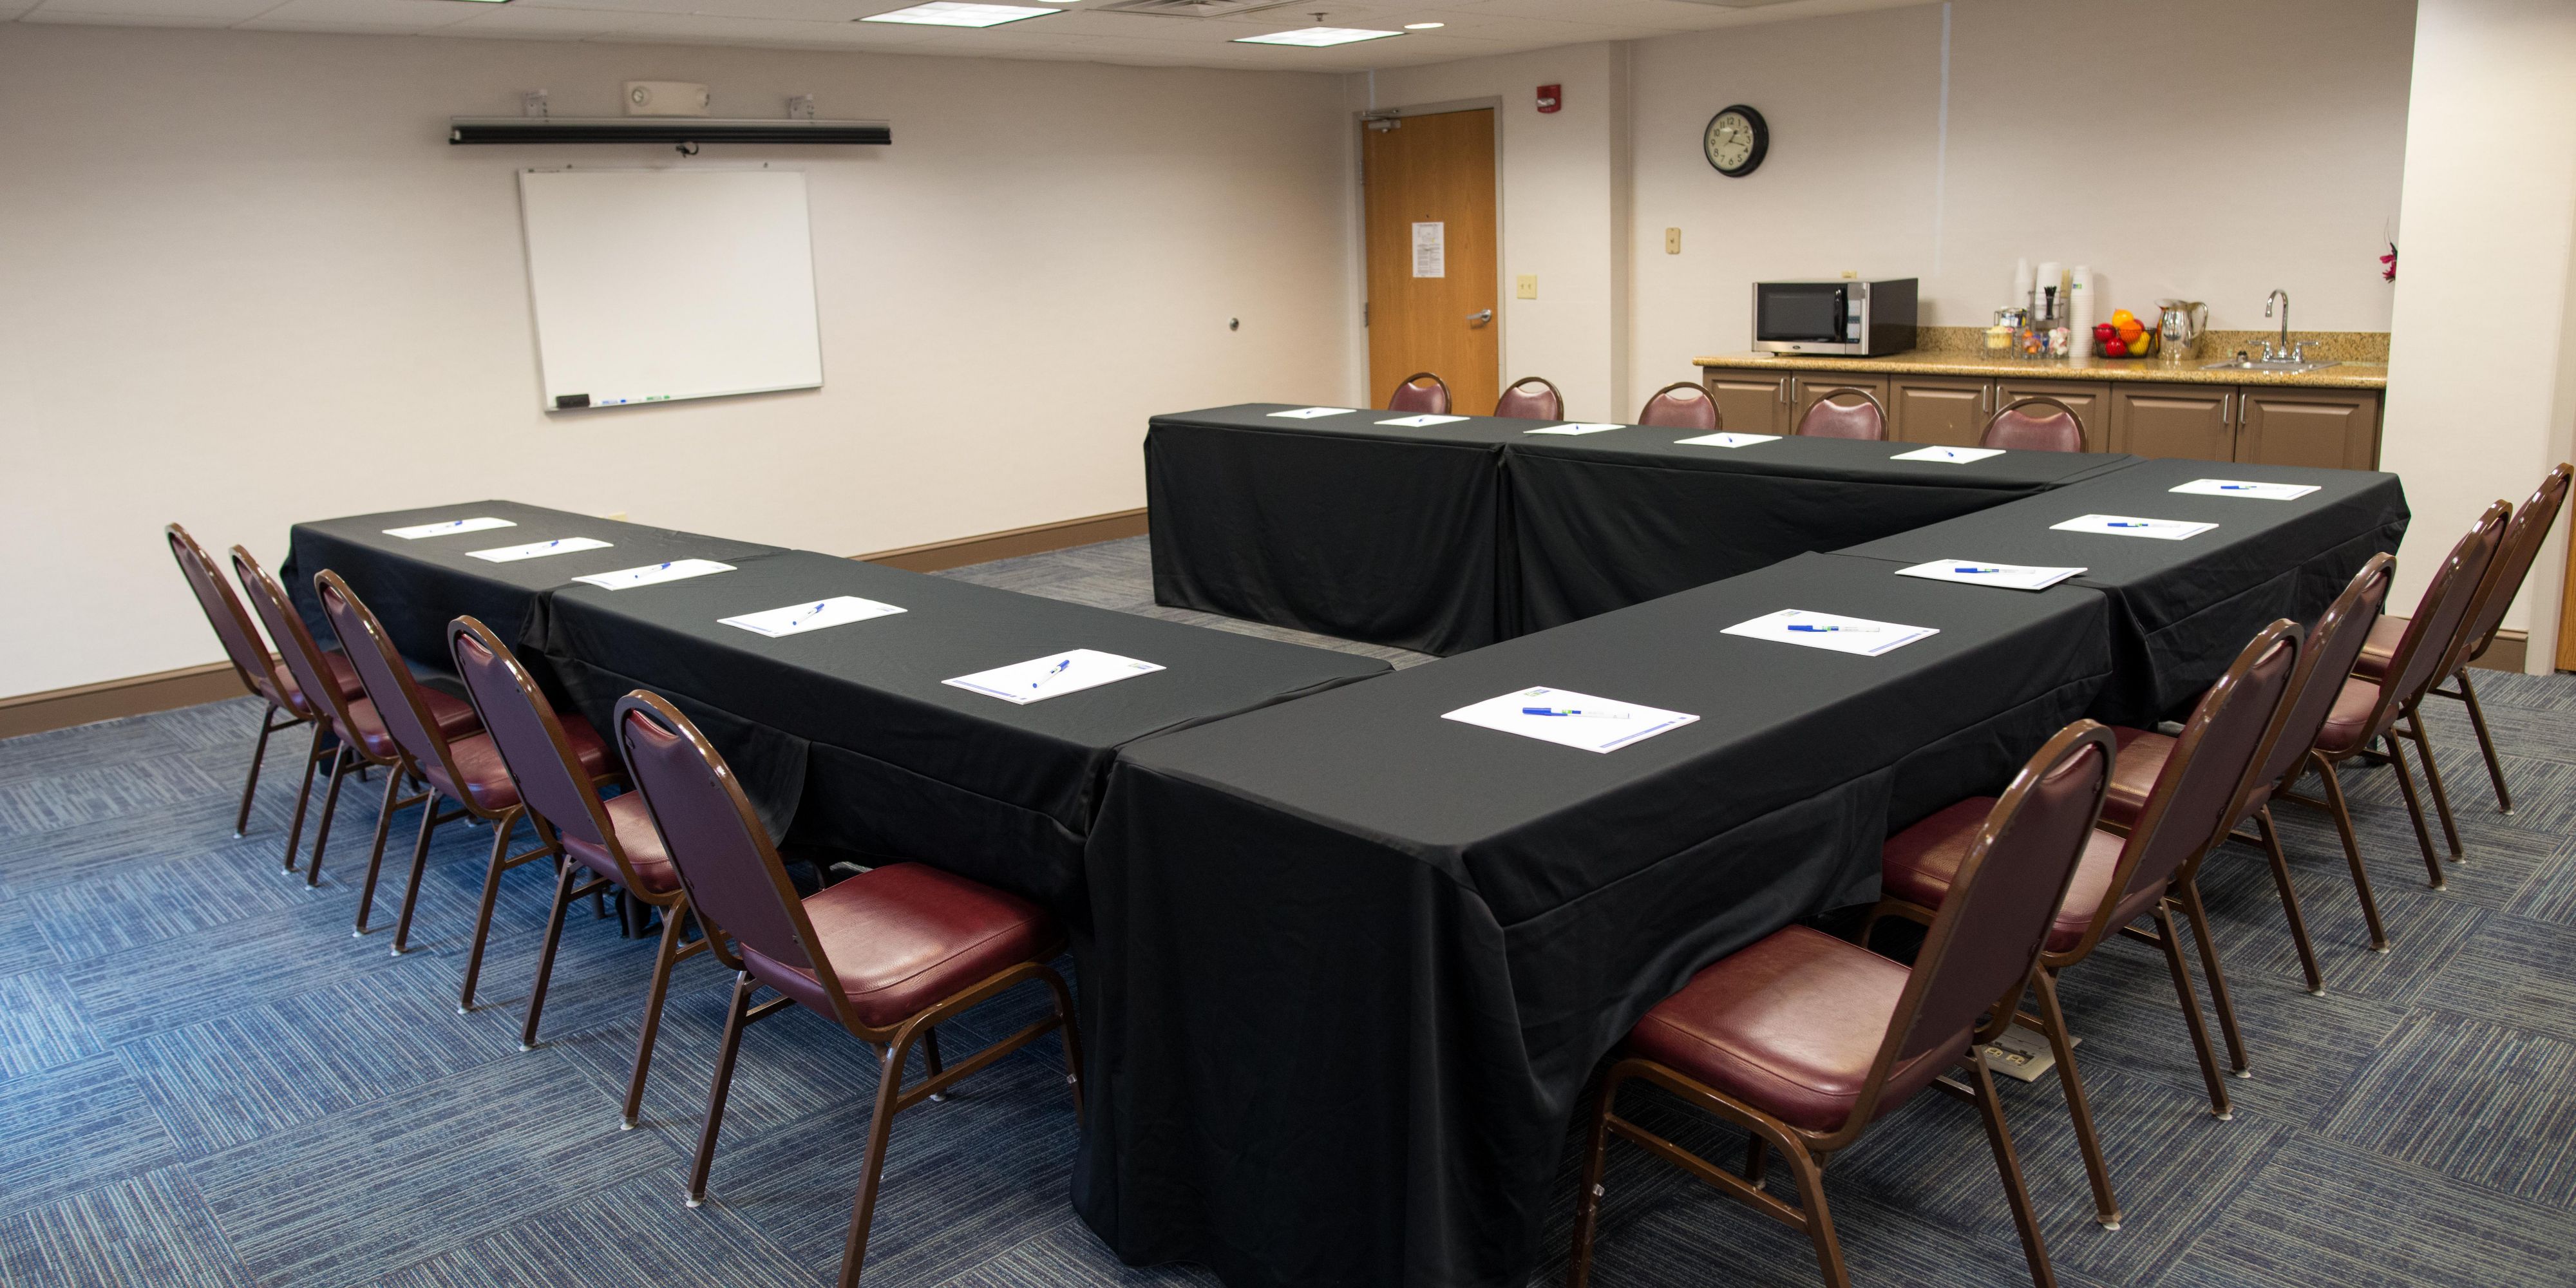 For your next business meeting reserve, the facilities available at this hotel's location in Chanhassen, MN. This hotel has a meeting room that can accommodate up to 12 people for a board meeting, and it is perfect for small meetings or presentations.